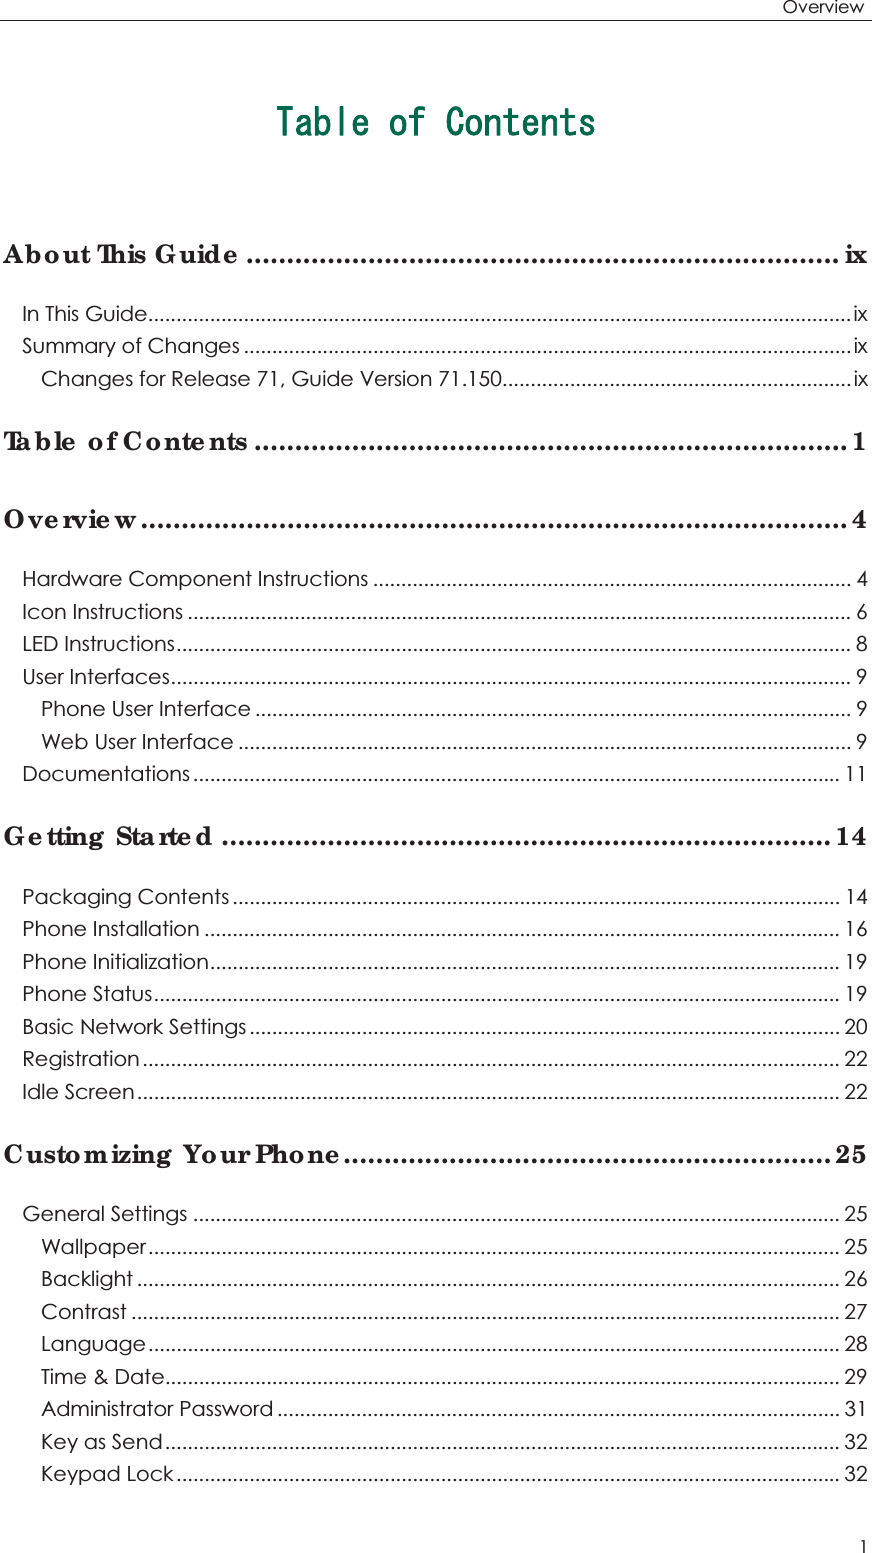 Overview1 6CDNGQH%QPVGPVUAbout This Guide.........................................................................ixIn This Guide.............................................................................................................................ixSummary of Changes ............................................................................................................ixChanges for Release 71, Guide Version 71.150..............................................................ixTable of Contents .........................................................................1Overview.......................................................................................4Hardware Component Instructions ..................................................................................... 4Icon Instructions ...................................................................................................................... 6LED Instructions........................................................................................................................ 8User Interfaces......................................................................................................................... 9Phone User Interface .......................................................................................................... 9Web User Interface ............................................................................................................. 9Documentations................................................................................................................... 11Getting Started ...........................................................................14Packaging Contents ............................................................................................................ 14Phone Installation ................................................................................................................. 16Phone Initialization................................................................................................................ 19Phone Status.......................................................................................................................... 19Basic Network Settings......................................................................................................... 20Registration............................................................................................................................ 22Idle Screen............................................................................................................................. 22Customizing Your Phone............................................................25General Settings ................................................................................................................... 25Wallpaper........................................................................................................................... 25Backlight ............................................................................................................................. 26Contrast .............................................................................................................................. 27Language........................................................................................................................... 28Time &amp; Date........................................................................................................................ 29Administrator Password .................................................................................................... 31Key as Send........................................................................................................................ 32Keypad Lock...................................................................................................................... 32